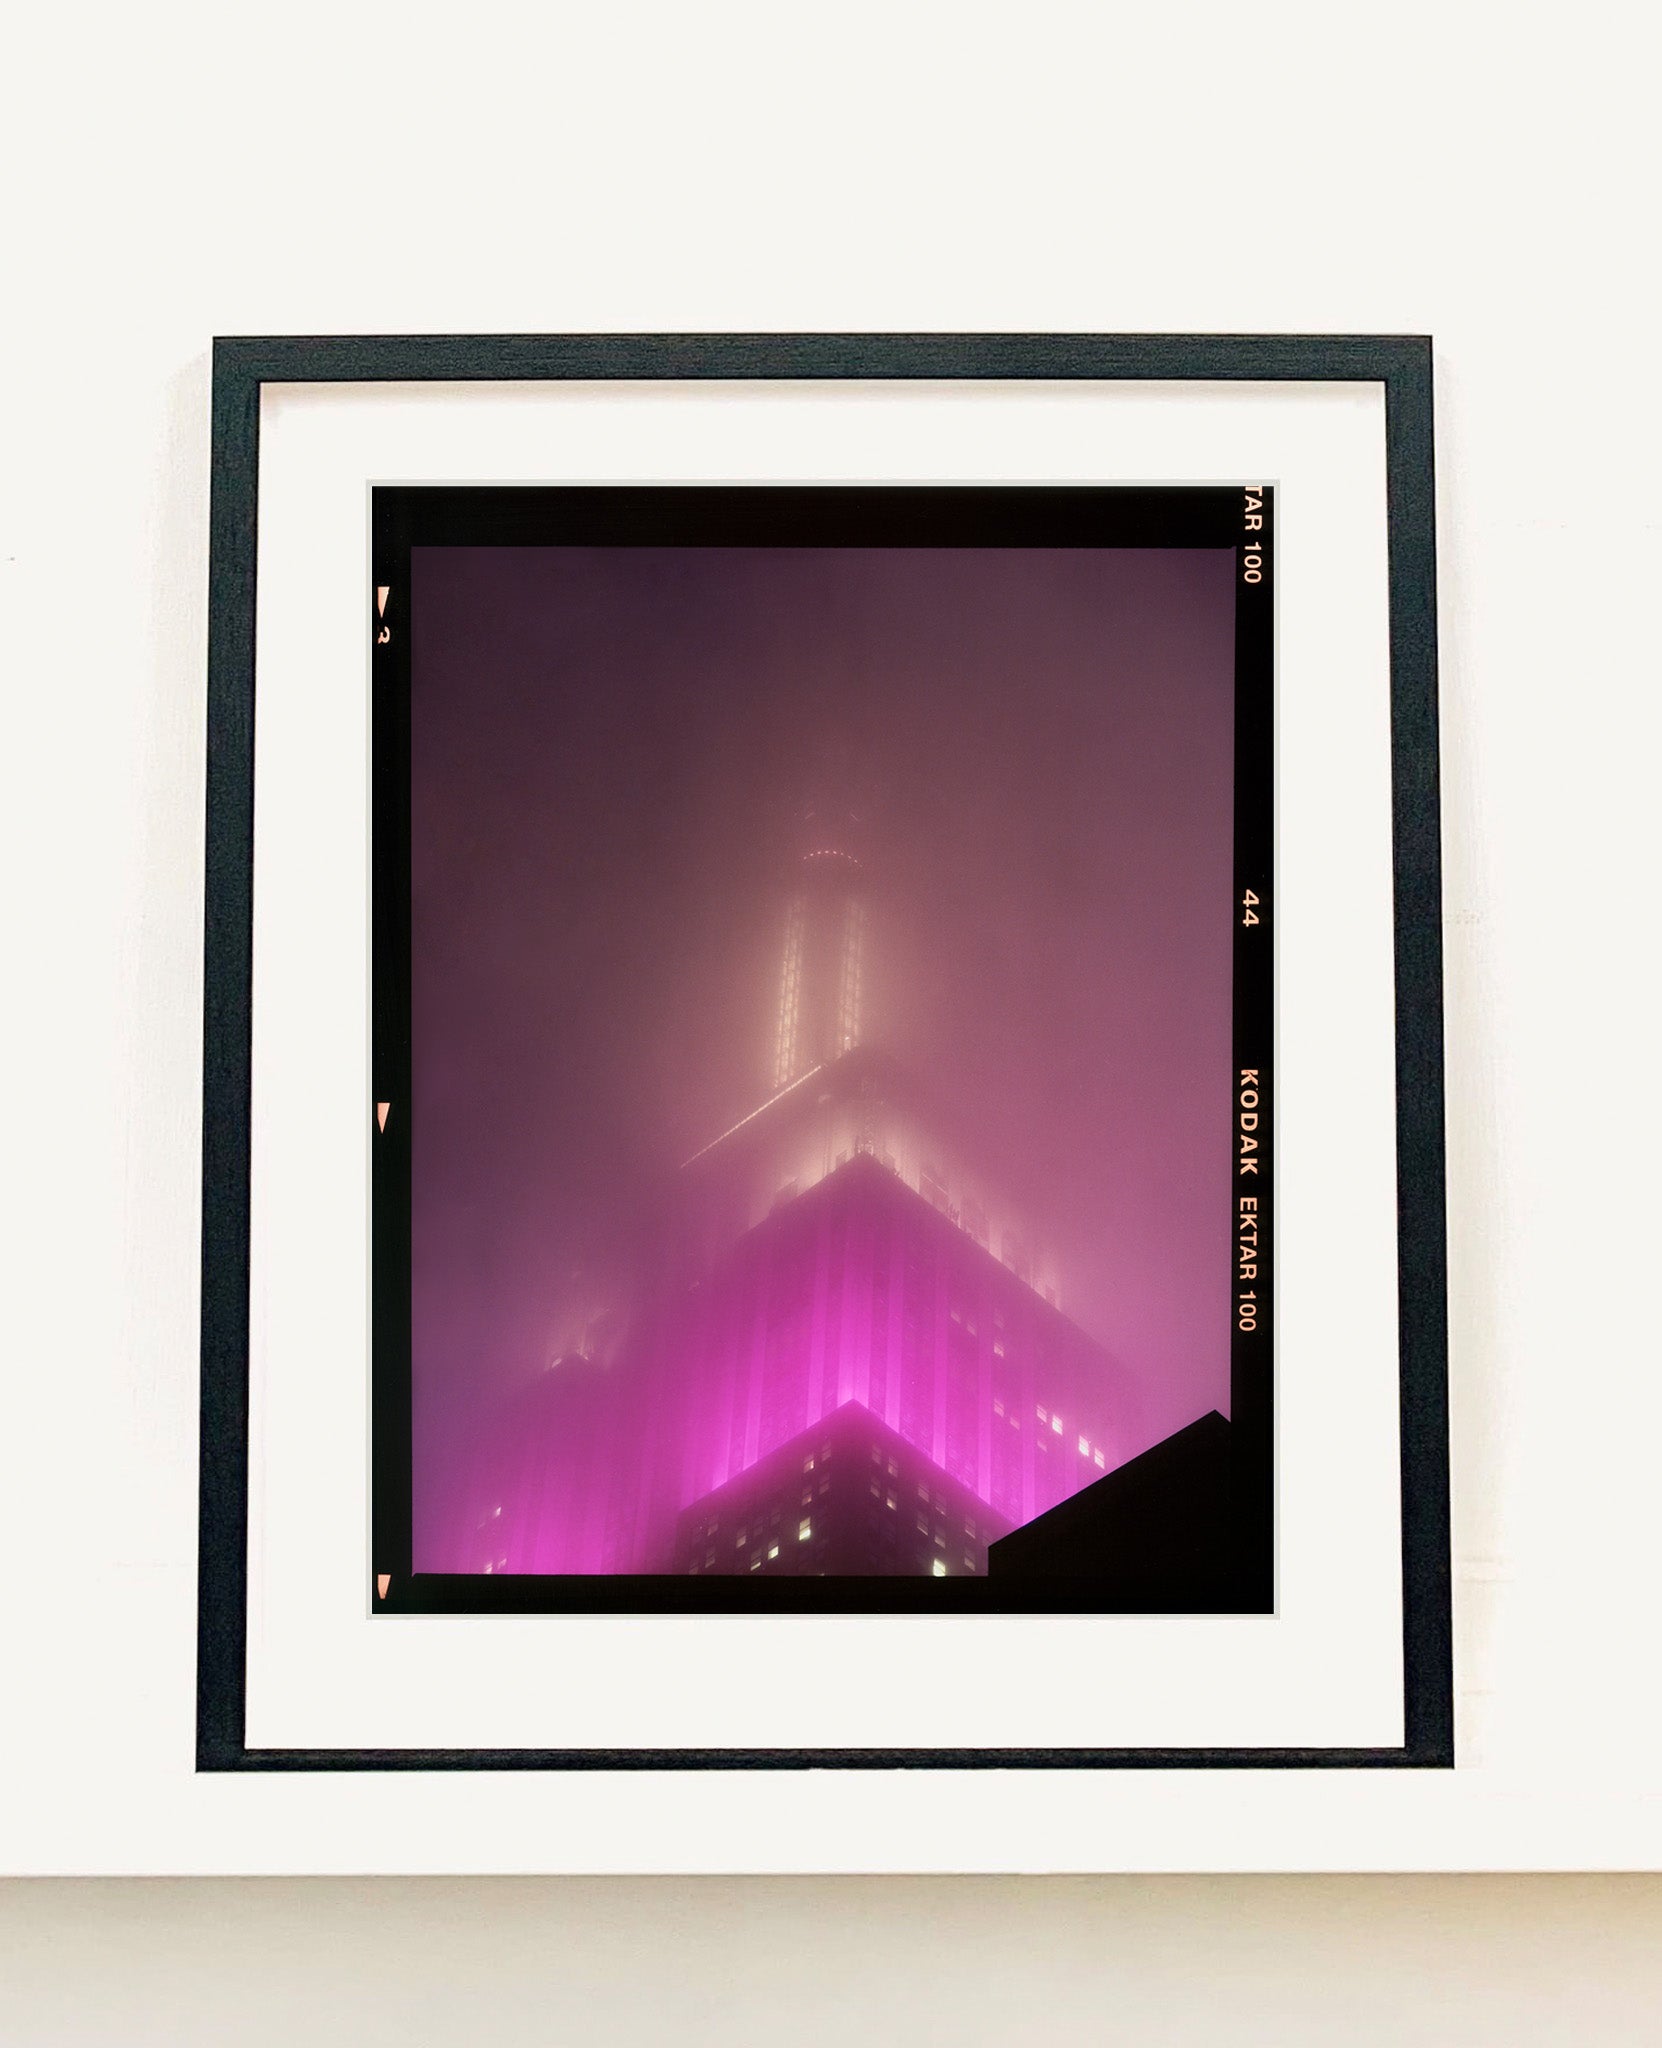 'NOMAD IX (Film Rebate)', New York. Richard Heeps has photographed the iconic Empire State building in the mist. The NOMAD sequence of photographs capture the art deco architecture illuminated by changing colours, and is part of Richard's street photography portfolio which depict the colour, fabric and structure of cities with distinct style. This 6x7 format edition is bordered by the Kodak film rebate. 